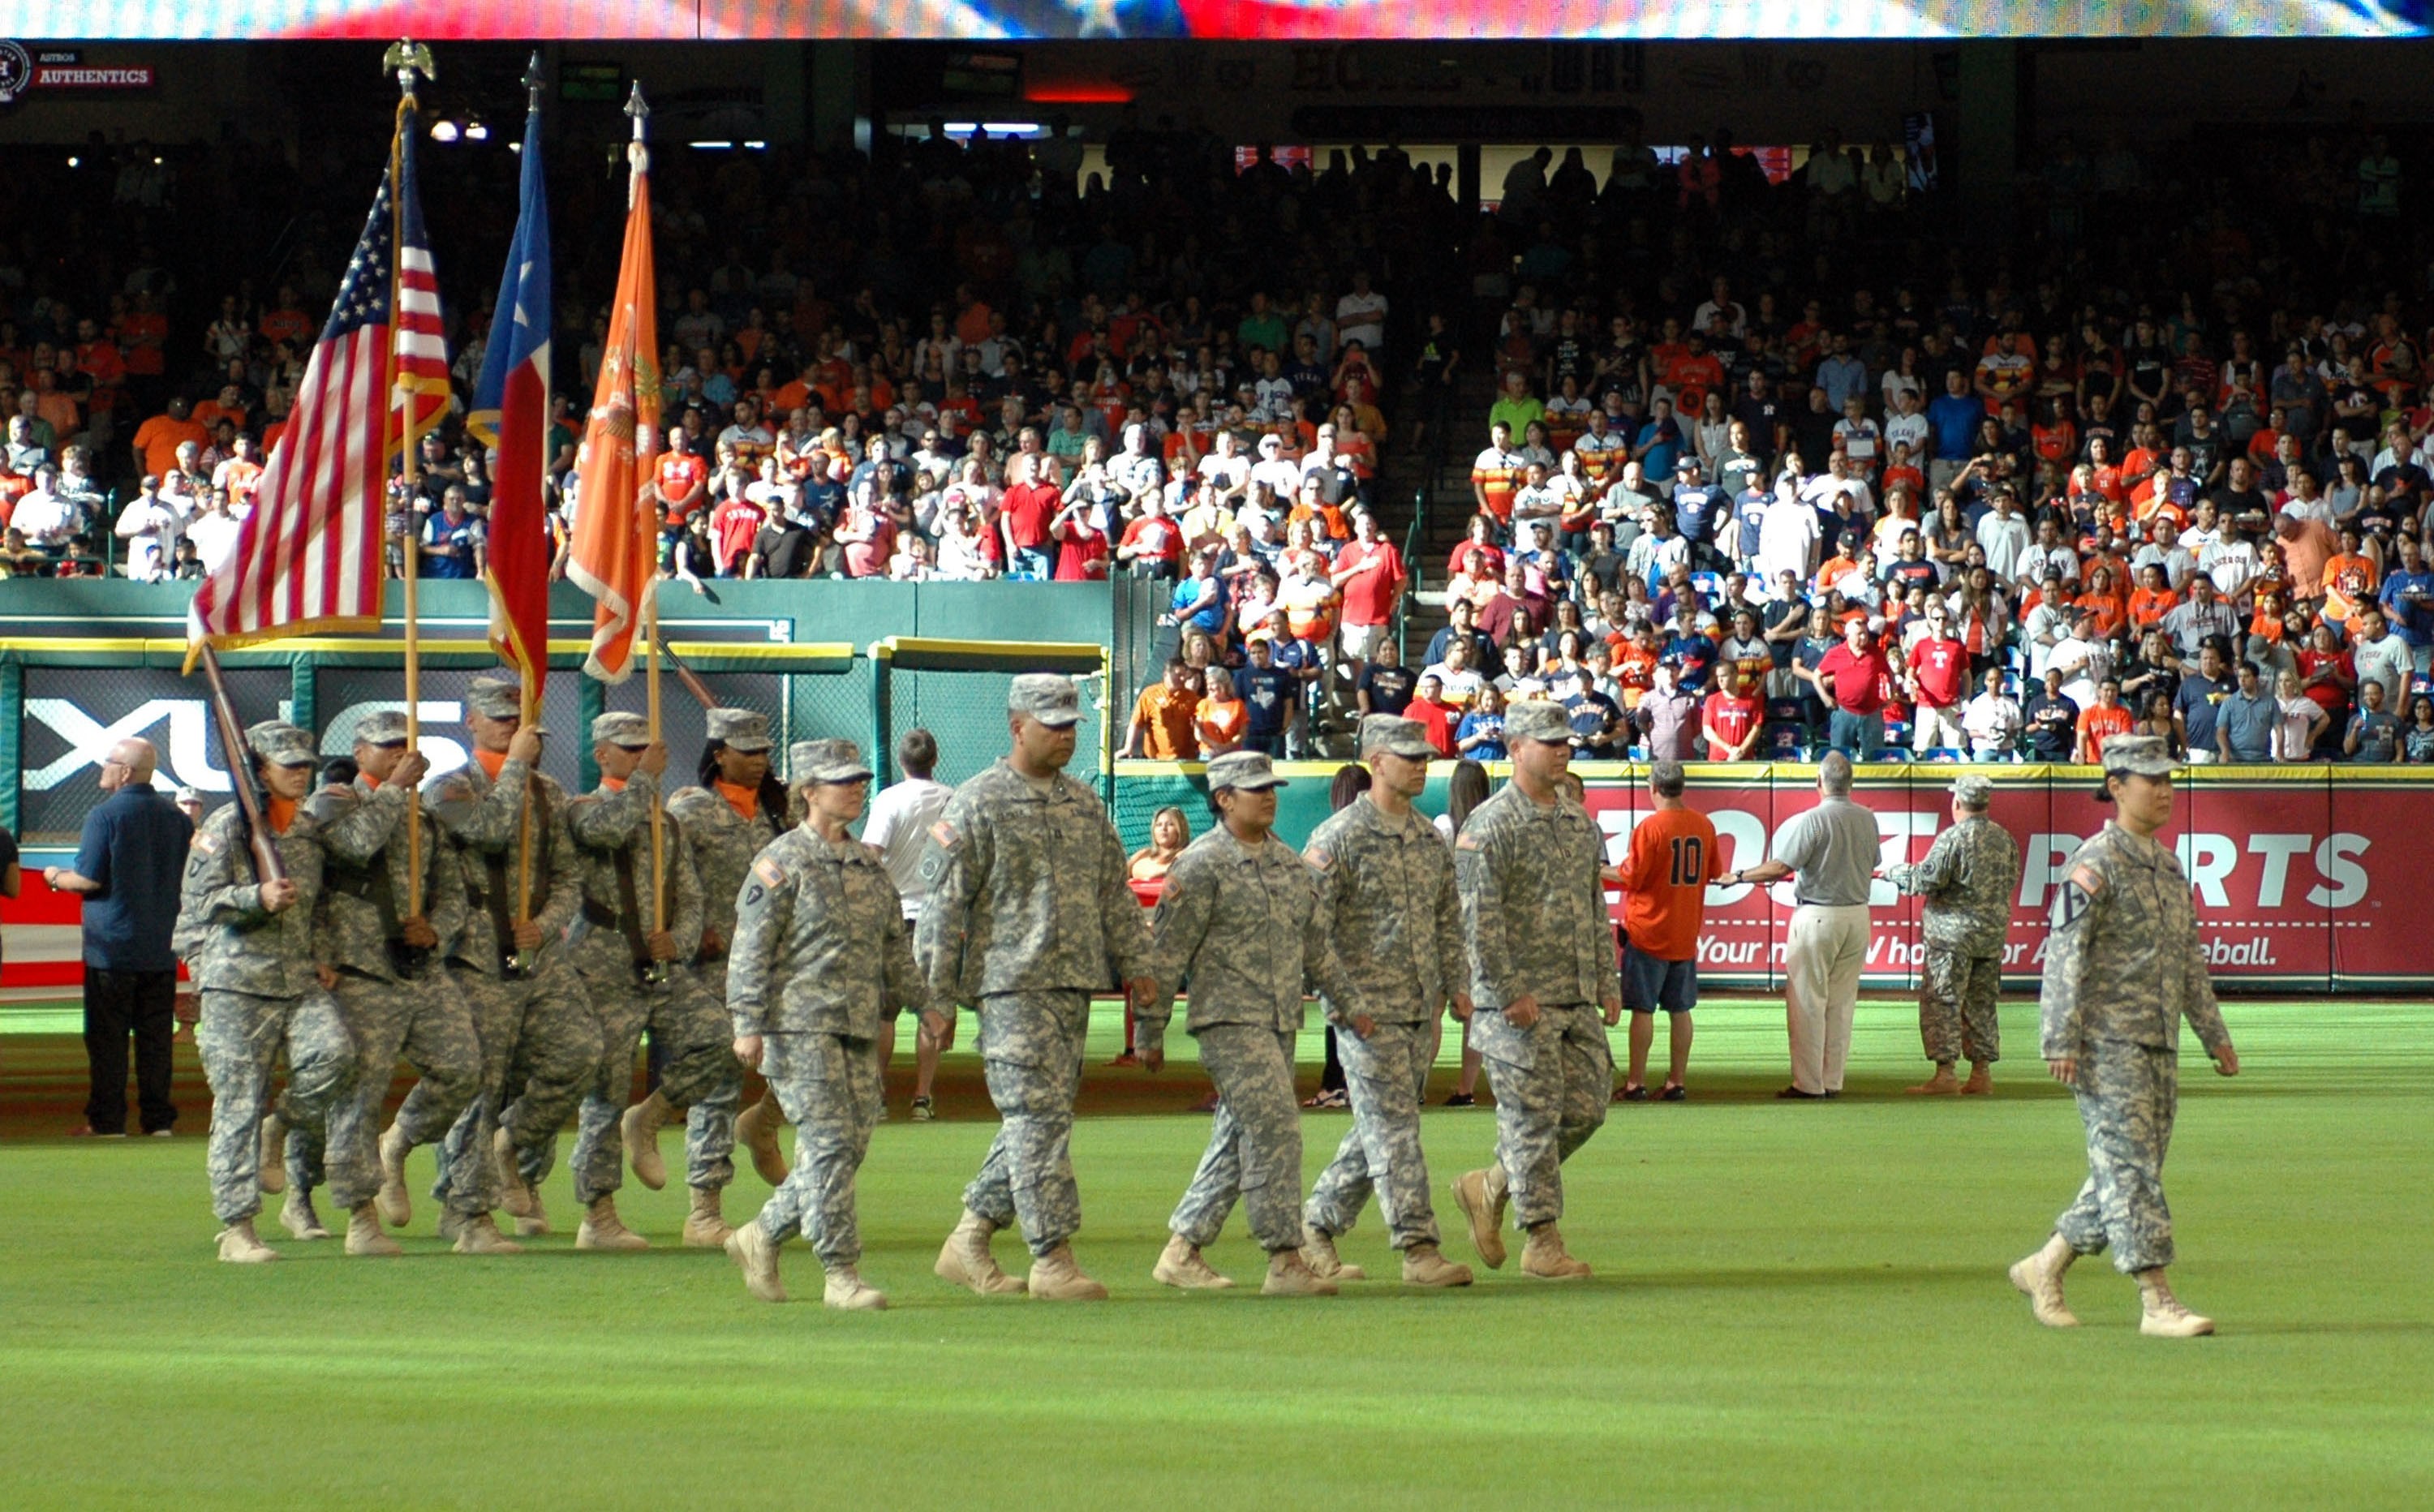 Houston Astros host deploying Signal Guardsmen Article The United